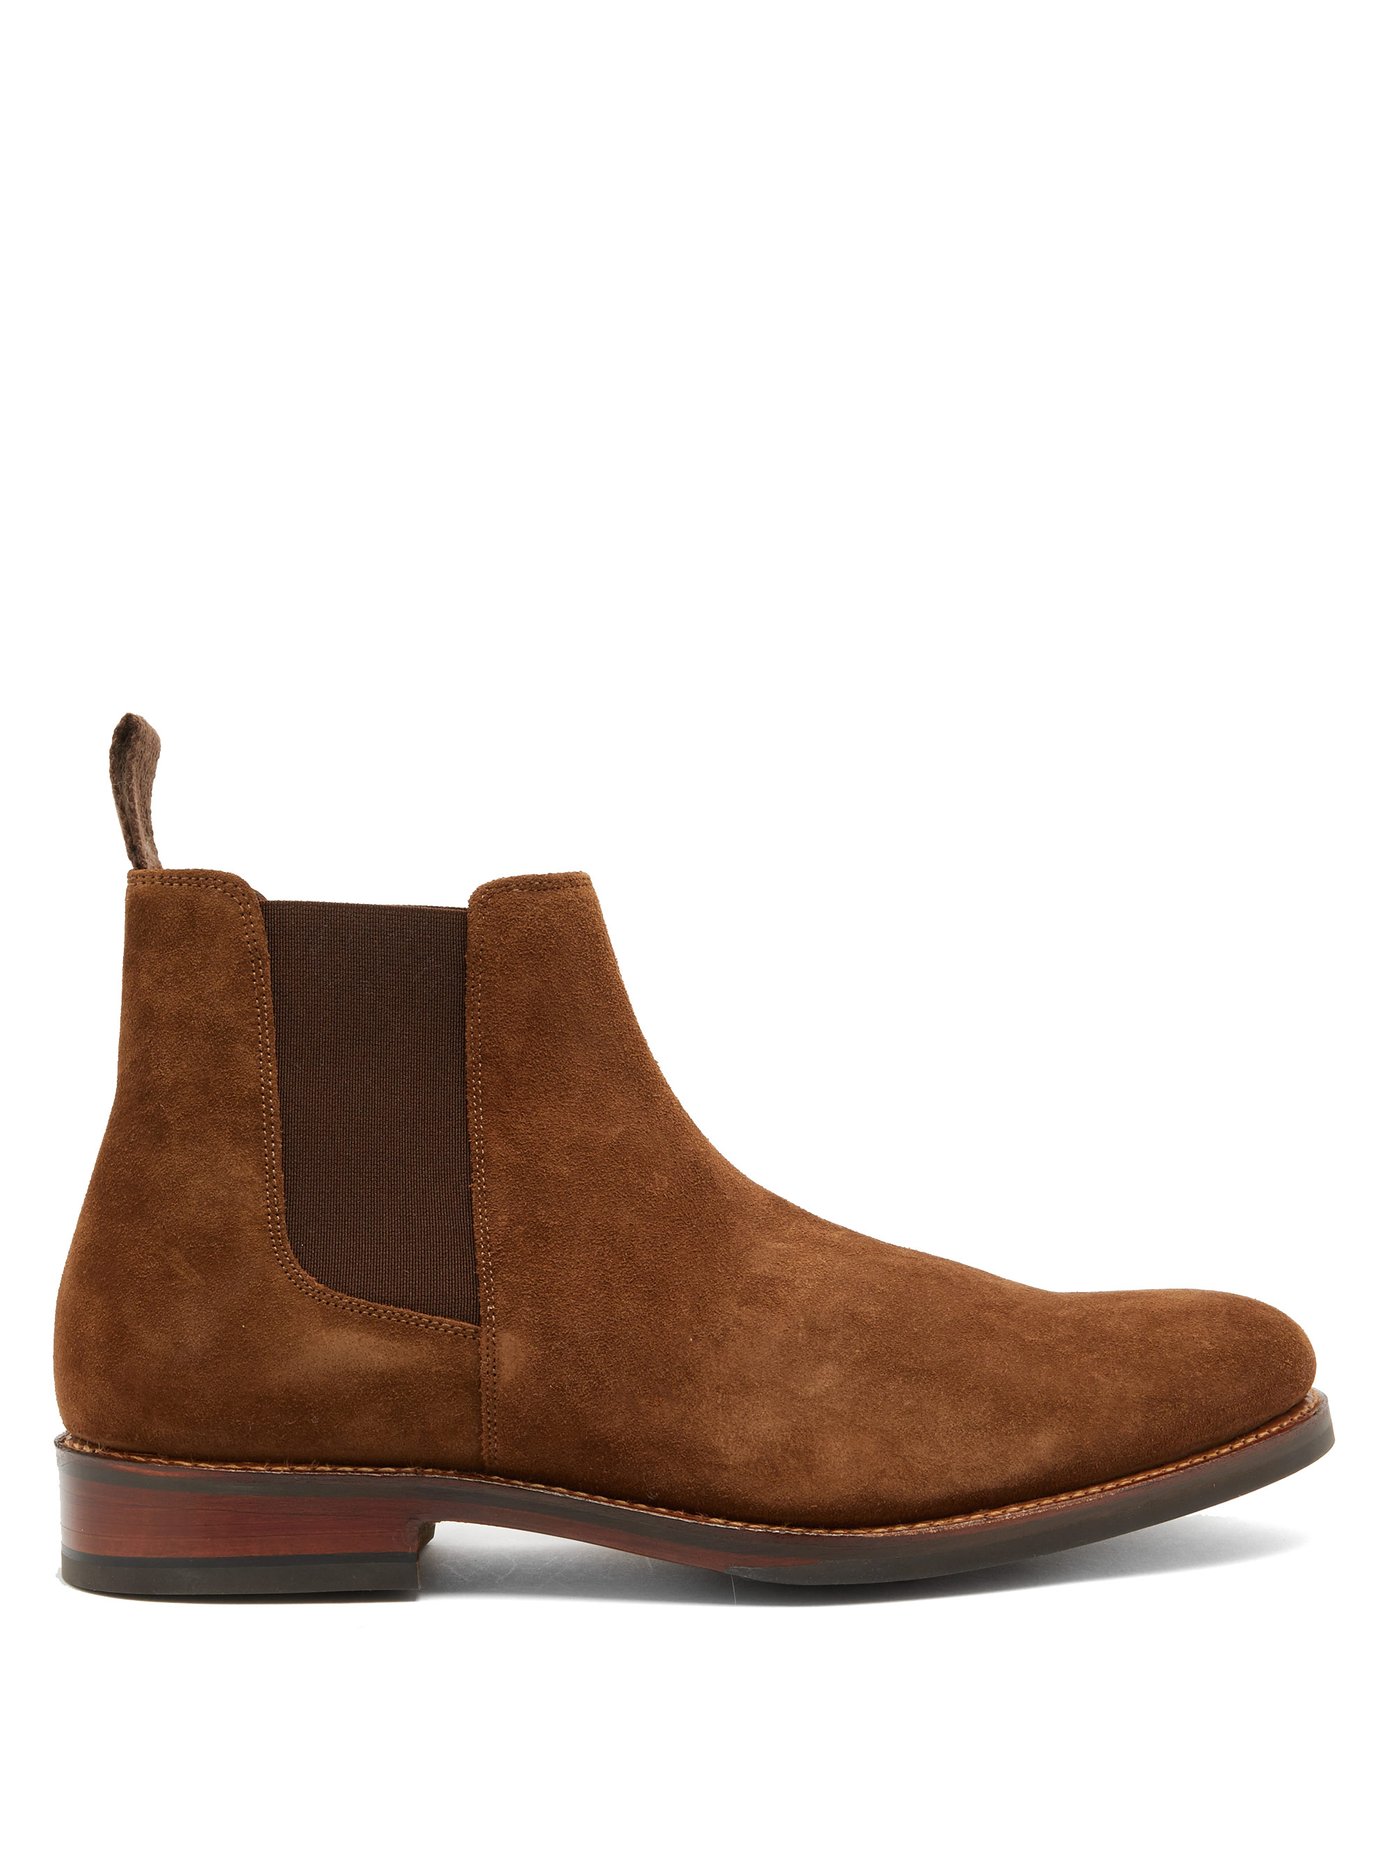 grenson suede boots